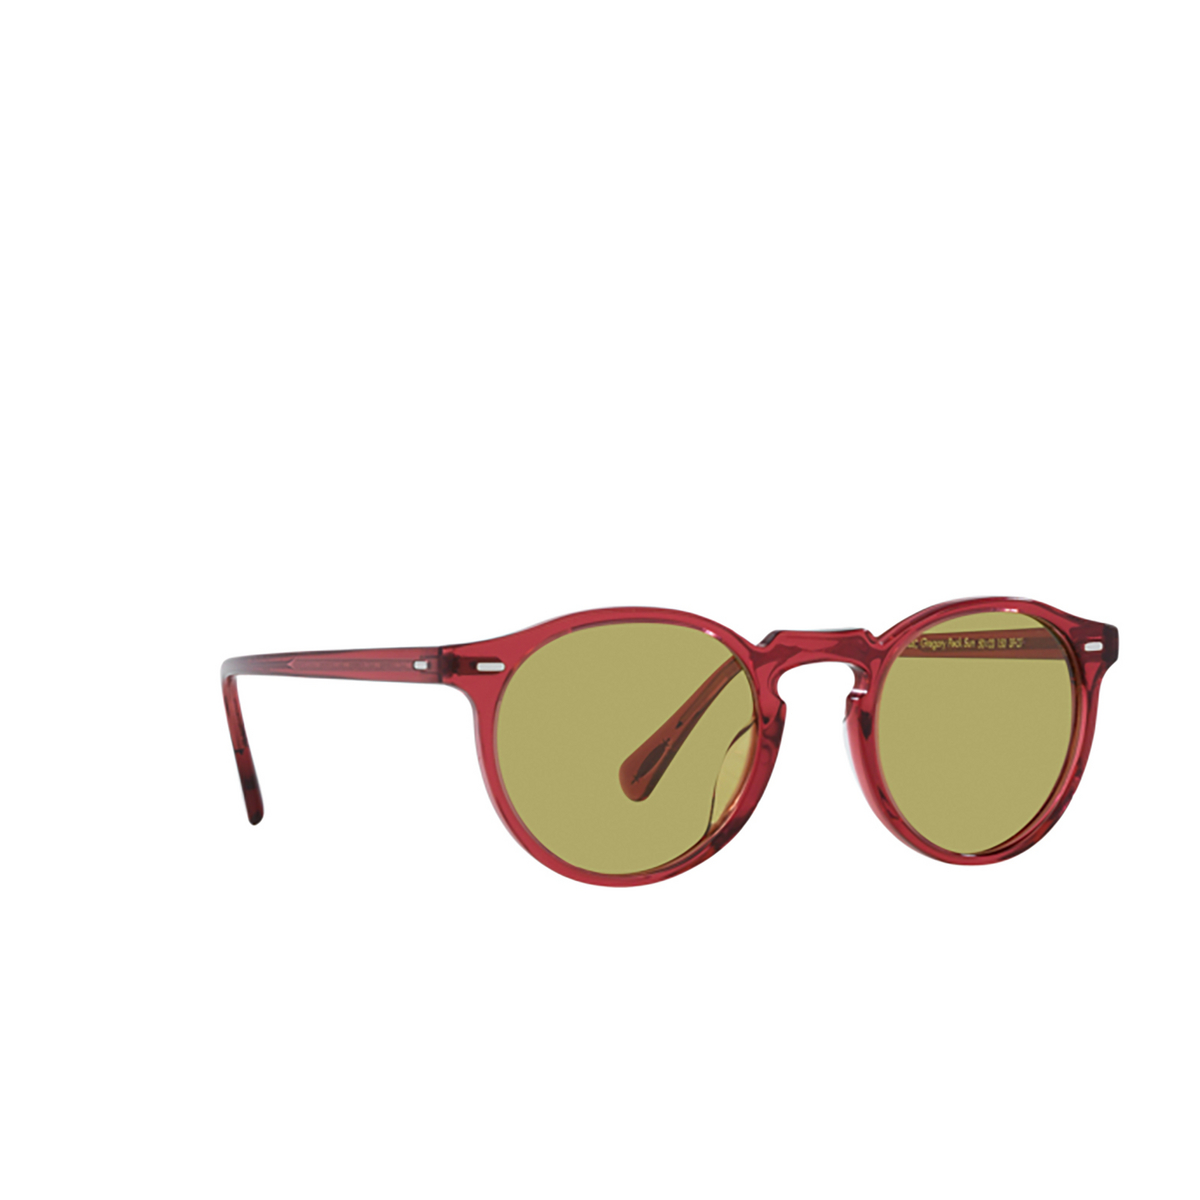 Oliver Peoples GREGORY PECK Sunglasses